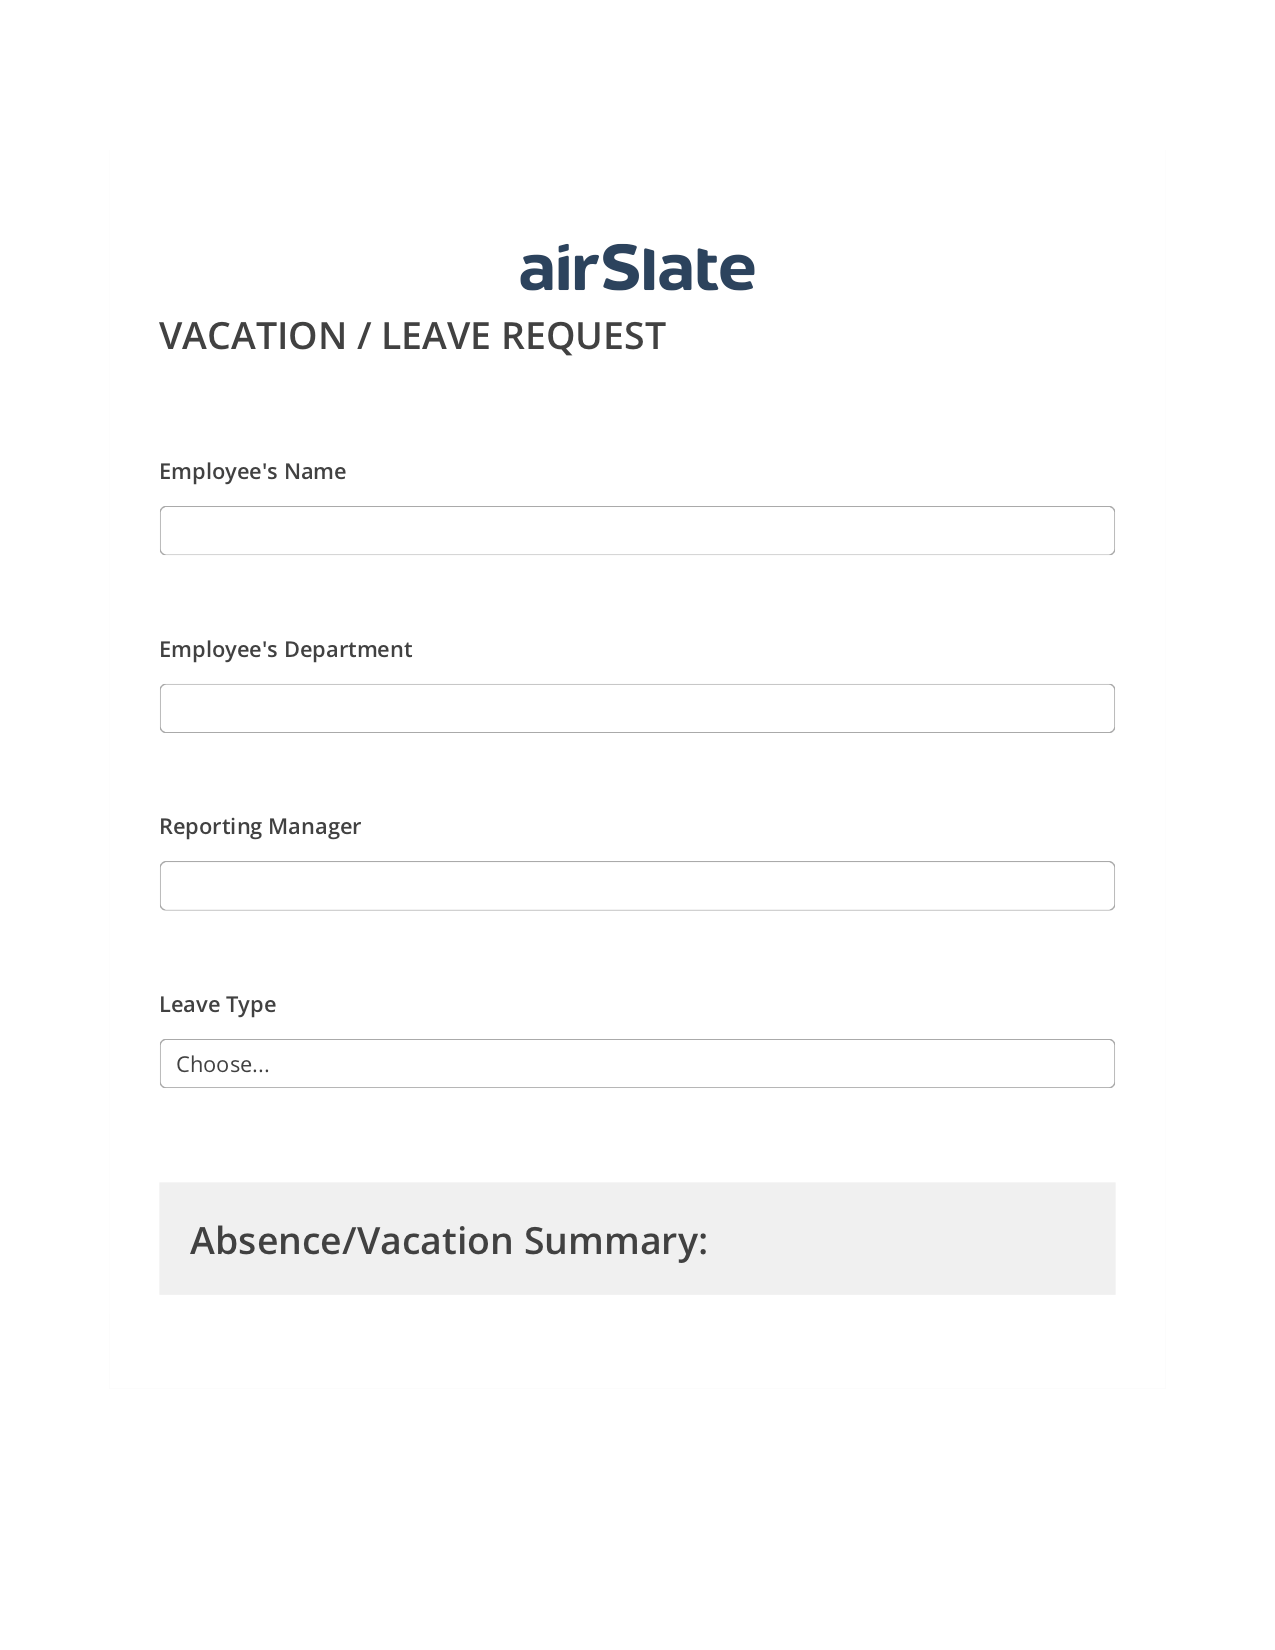 Vacation/Leave Request Workflow Pre-fill from Salesforce Records with SOQL Bot, Update NetSuite Record Bot, Export to NetSuite Bot